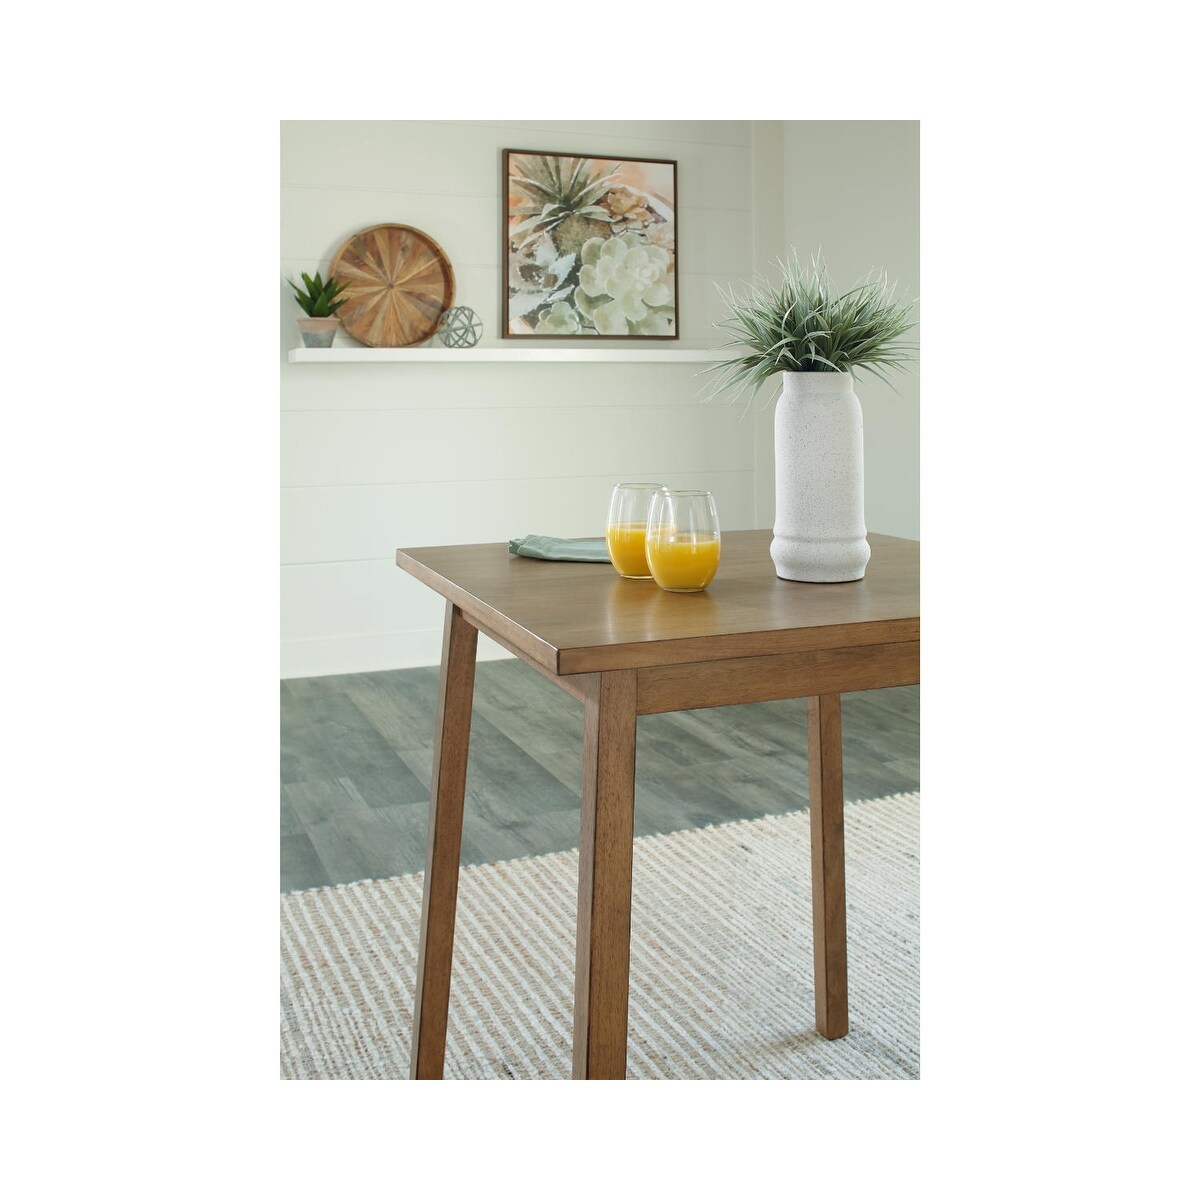 Signature Design by Ashley Shully Square Counter Height Dining Table - 32"W x 32"D x 36"H - White